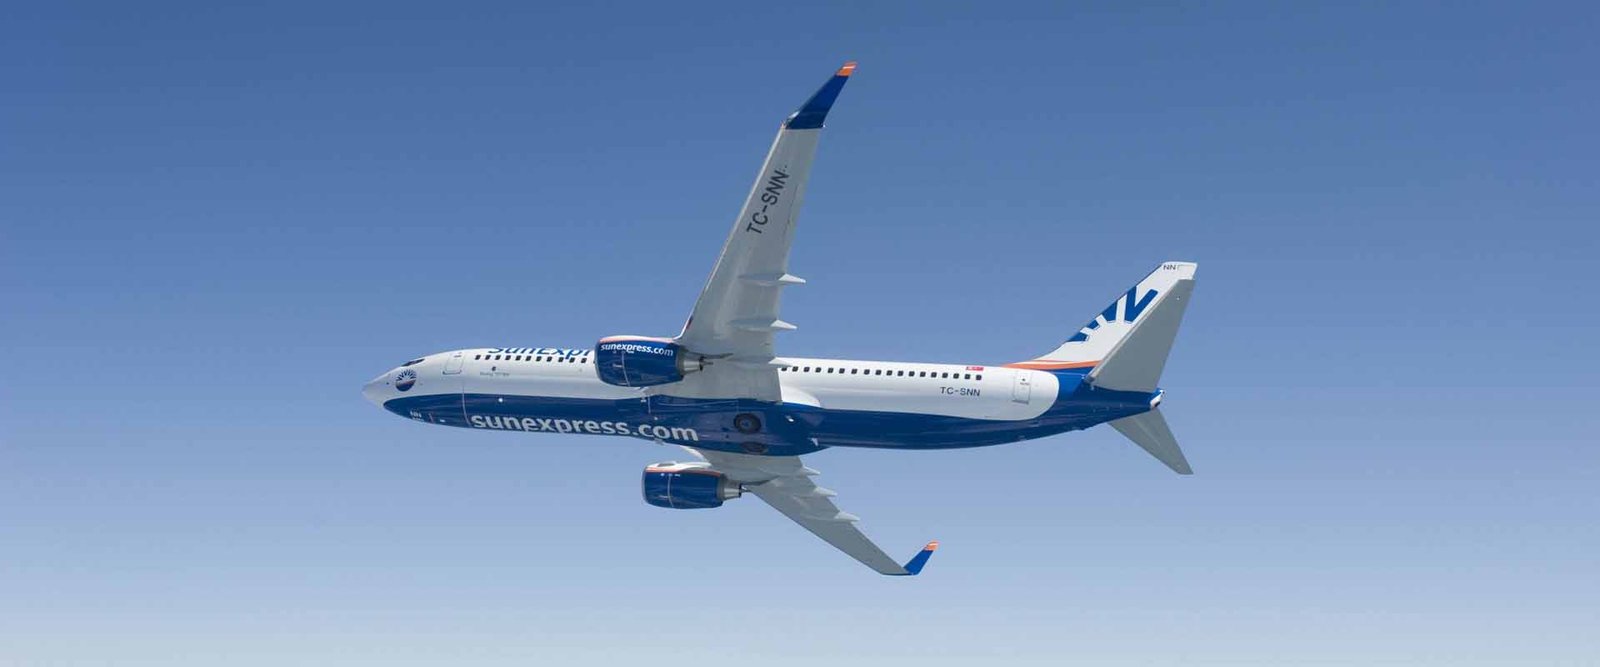 Sunexpress Evacuated More Than 4,000 People From The Earthquake Affected Area (1)